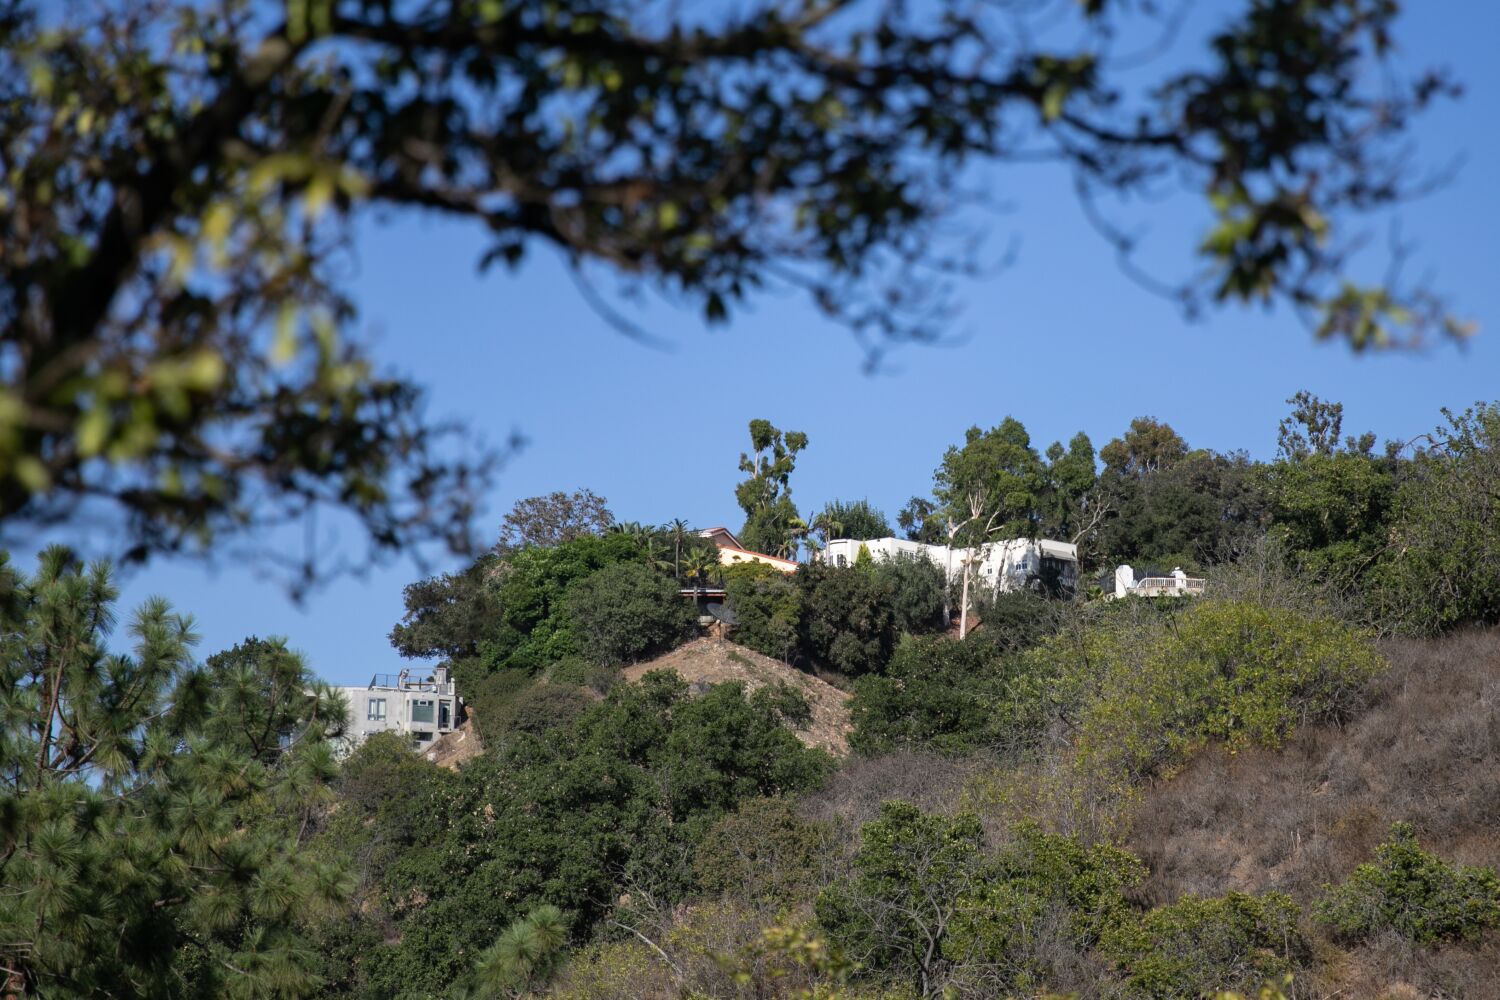 Editorial: Wildlife habitat or a luxury resort on an L.A. hillside? It shouldn't even be a question